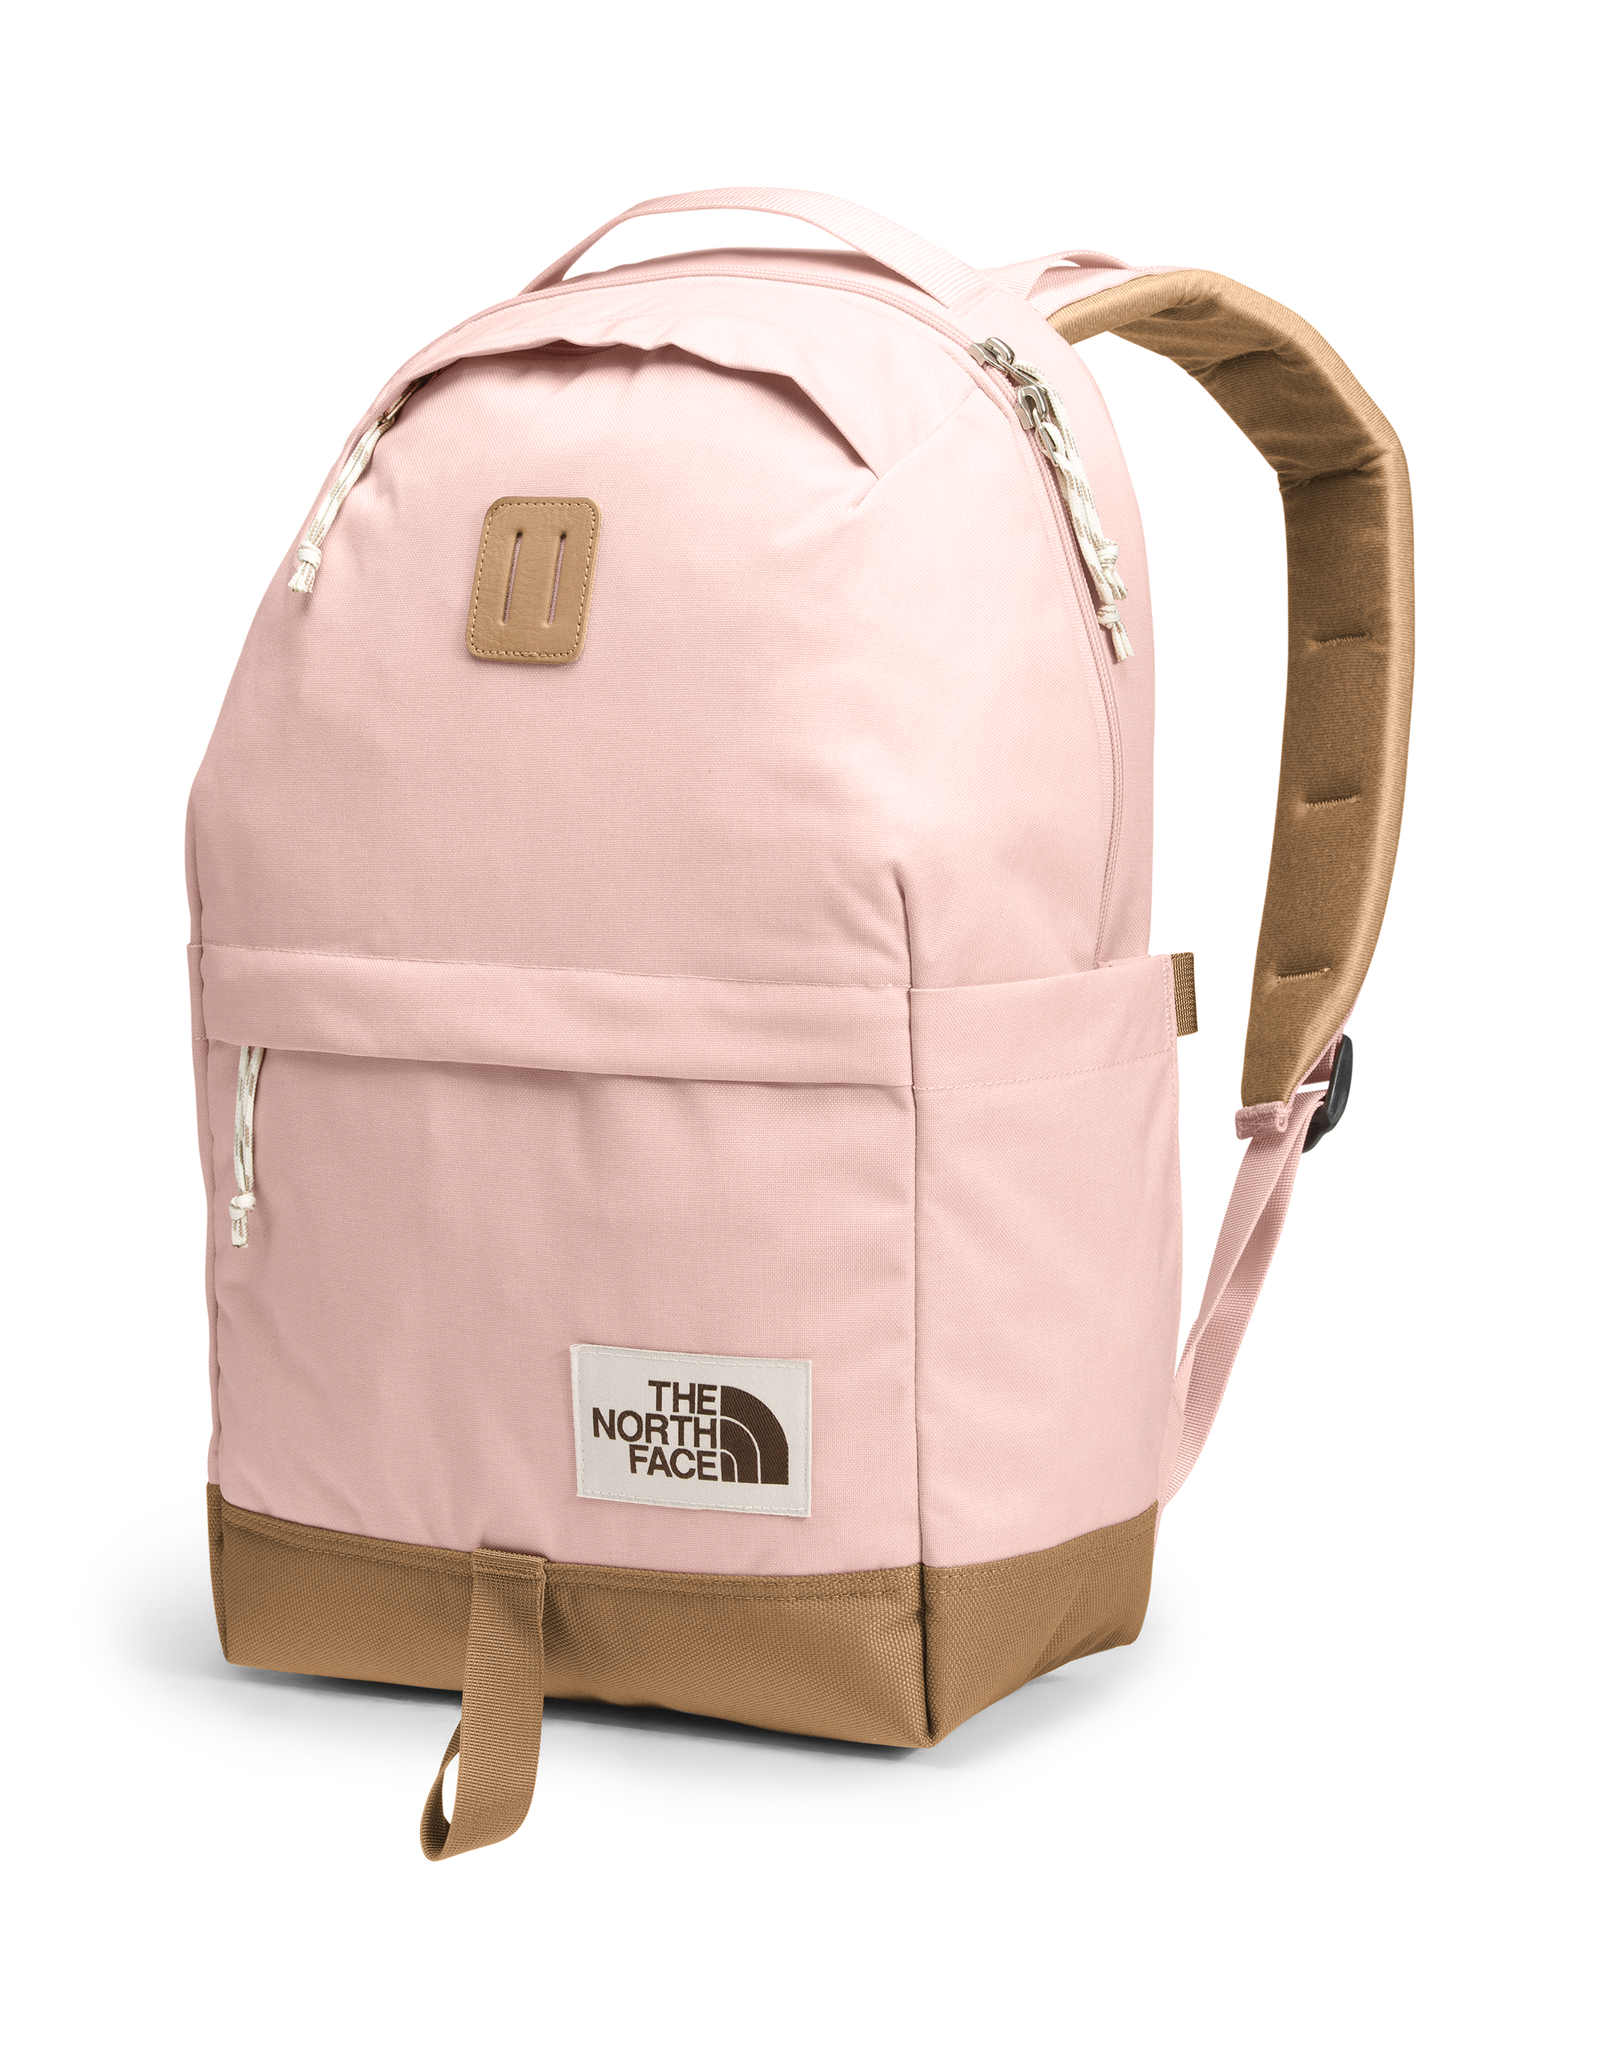 THE NORTH FACE DAYPACK 22L